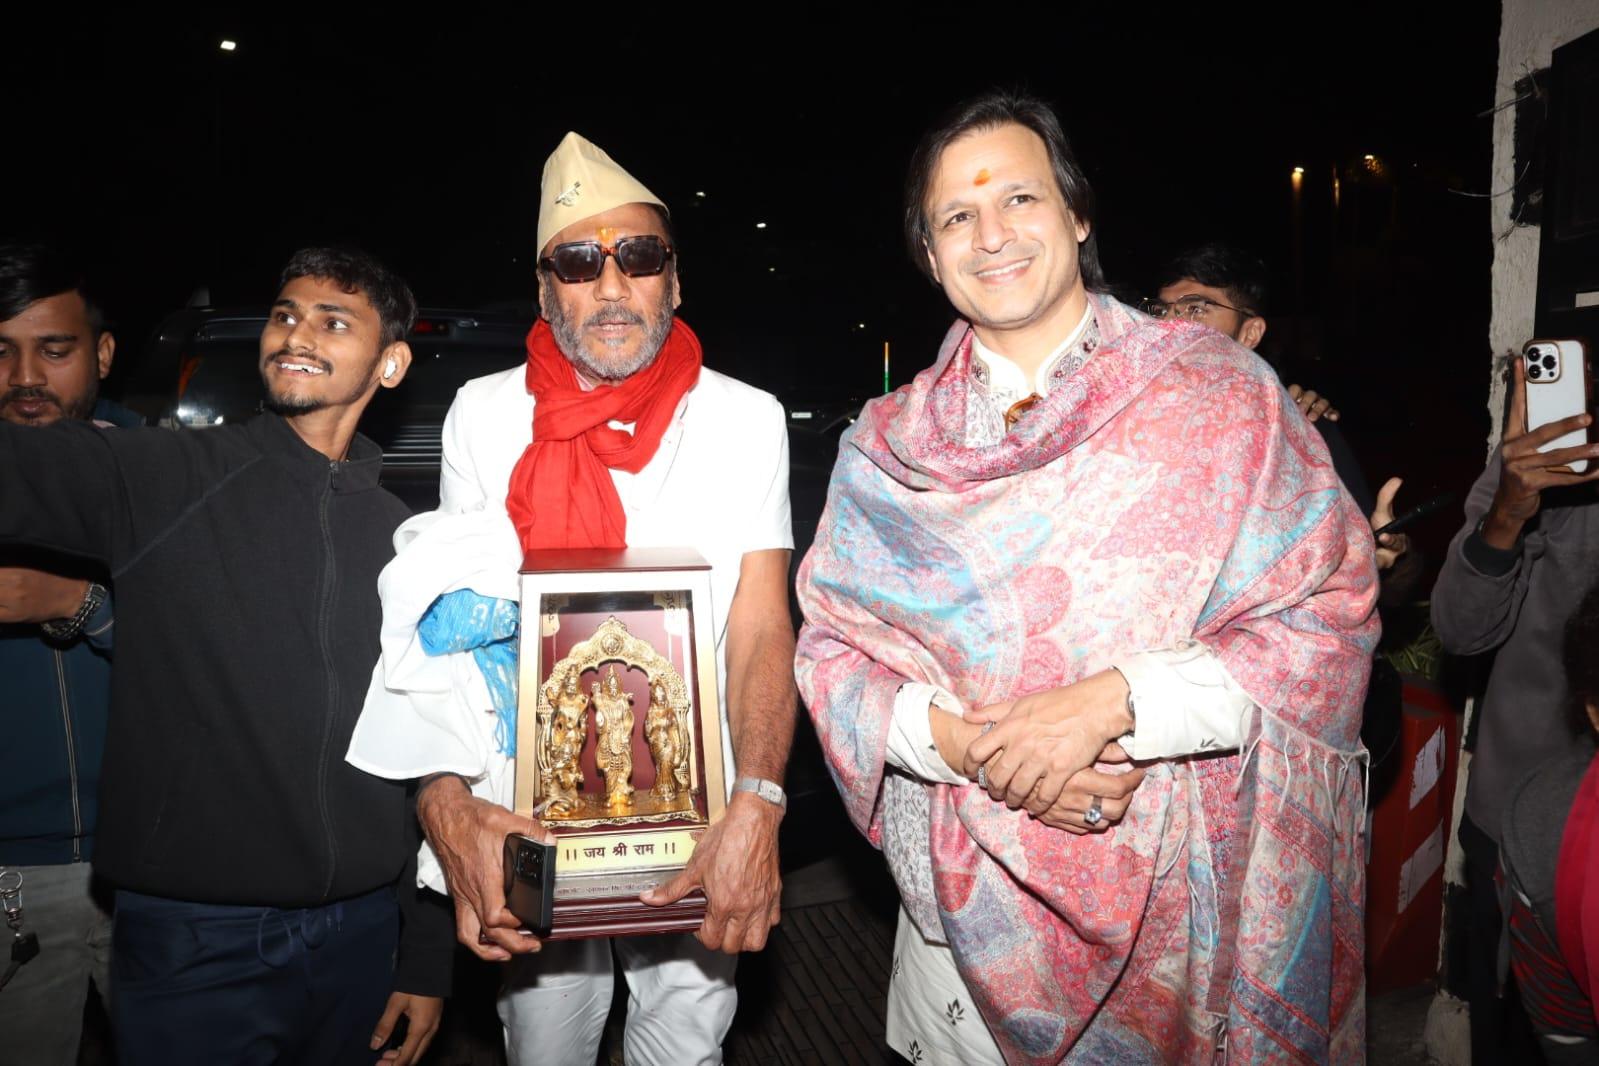 Jackie Shroff brought Ram Mandir Idol as he returned from Ayodhya. The actor posed with Vivek Oberoi